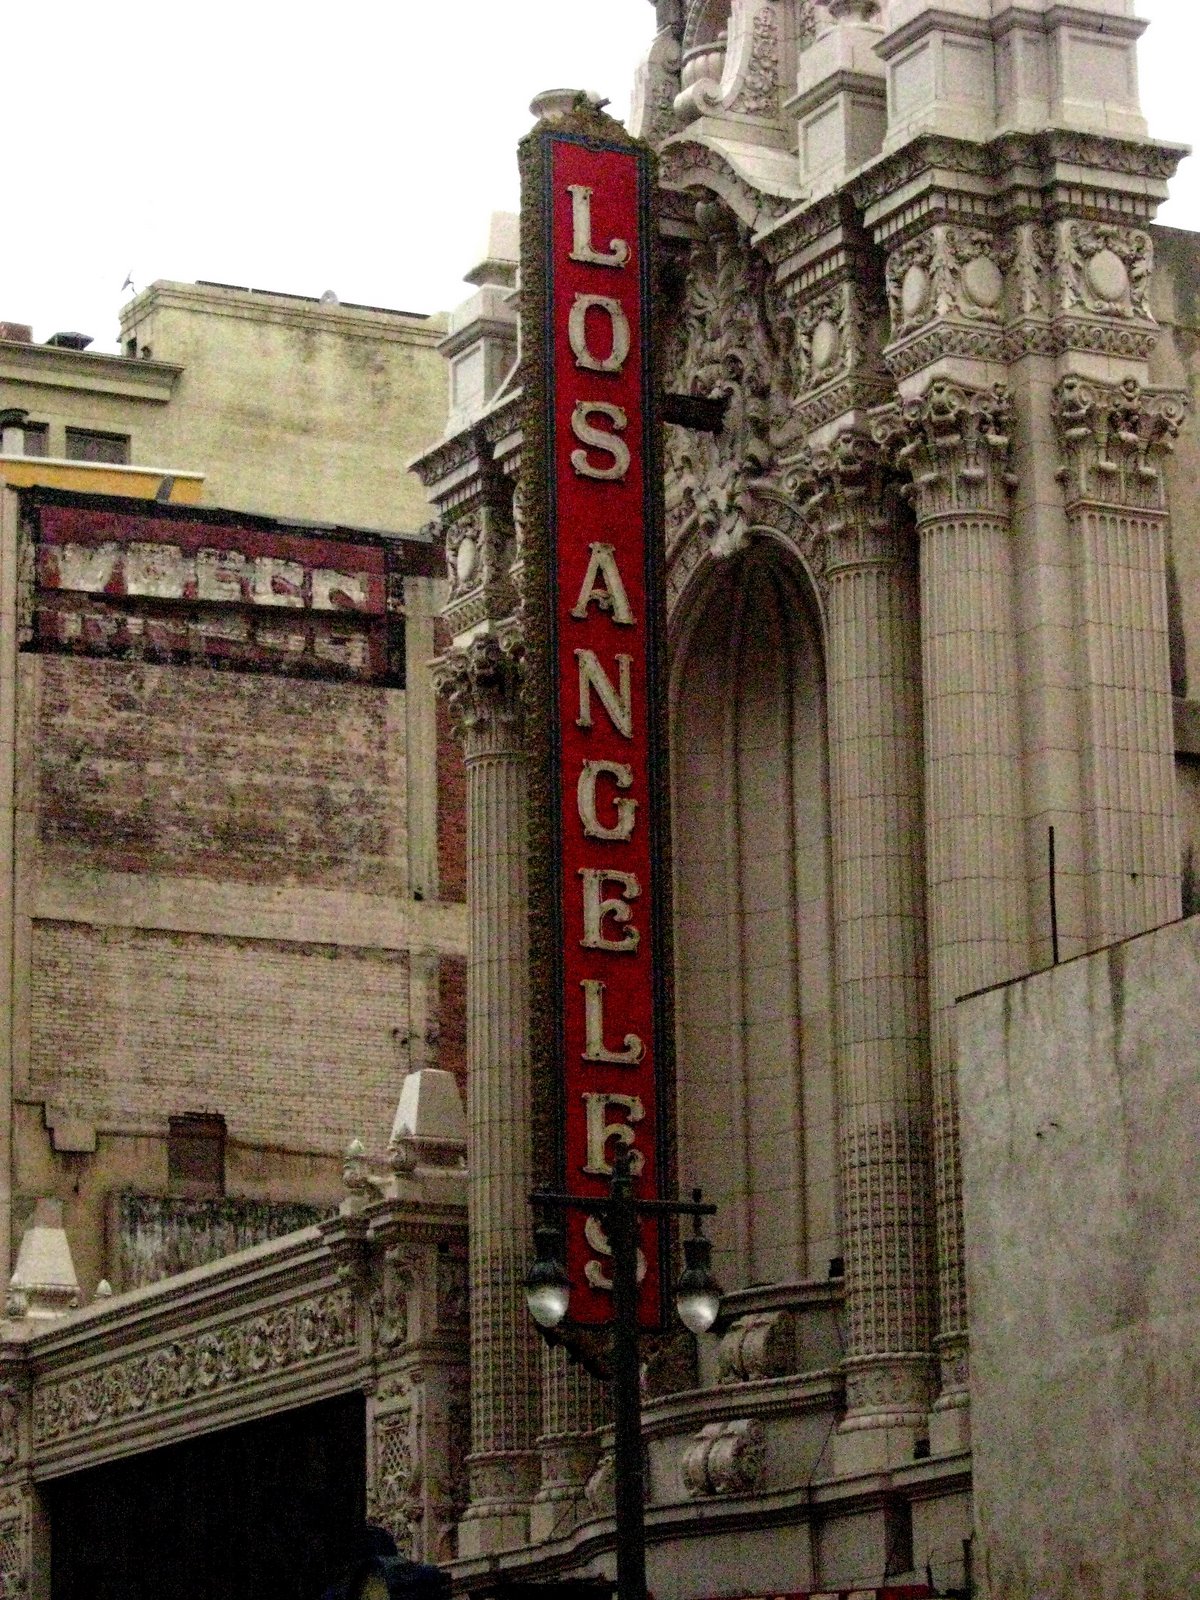 [Los+Angeles+Theater+front.jpg]